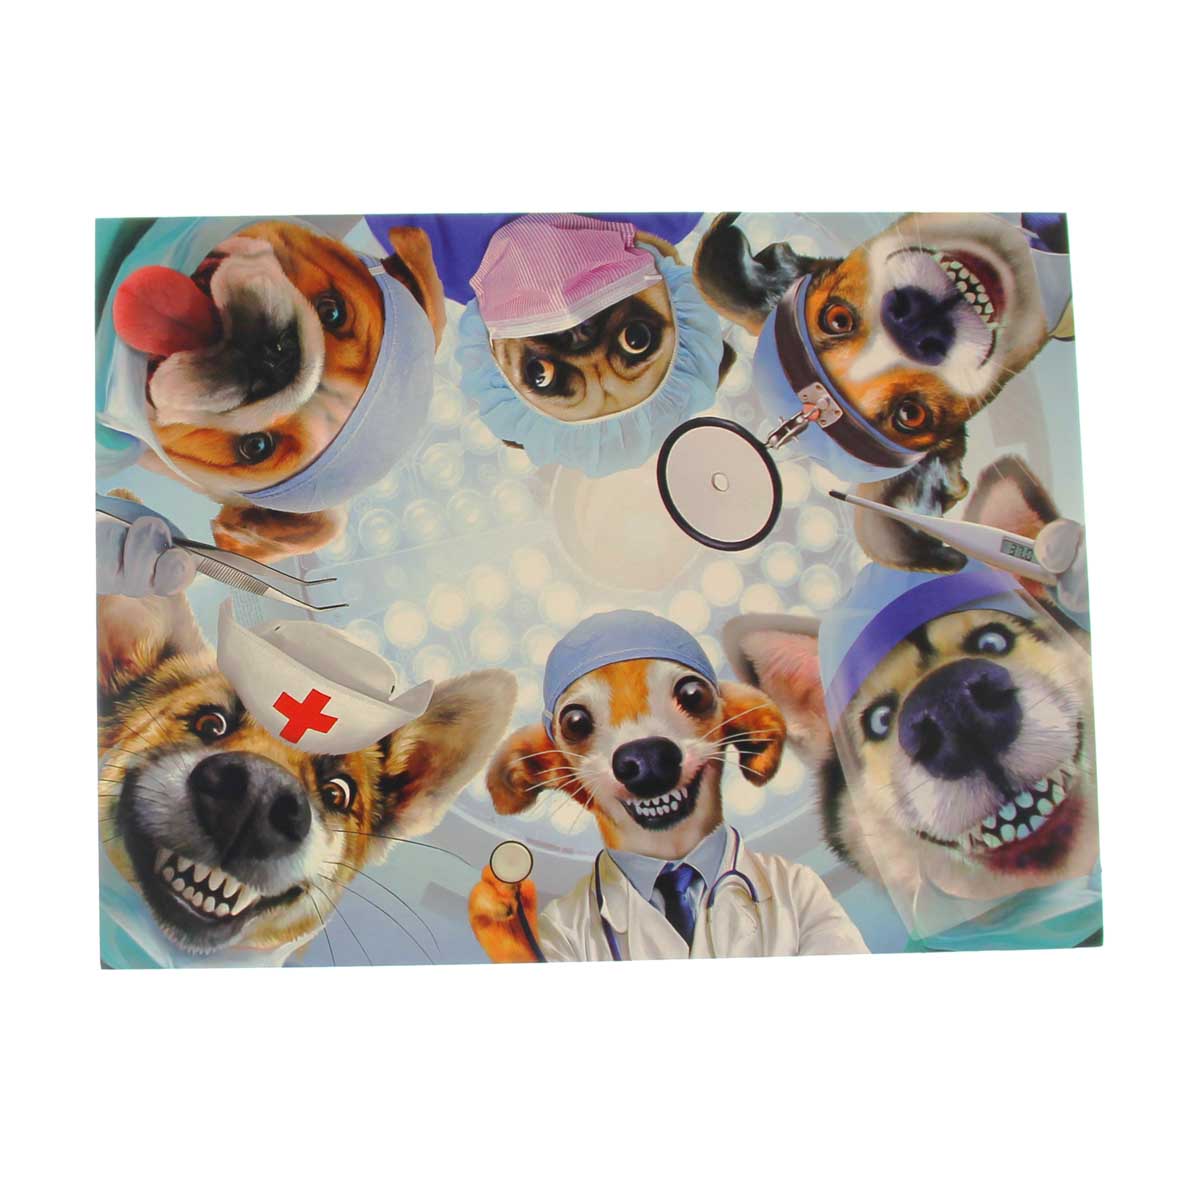 Get Well Card:  (image of dogs in scrubs)